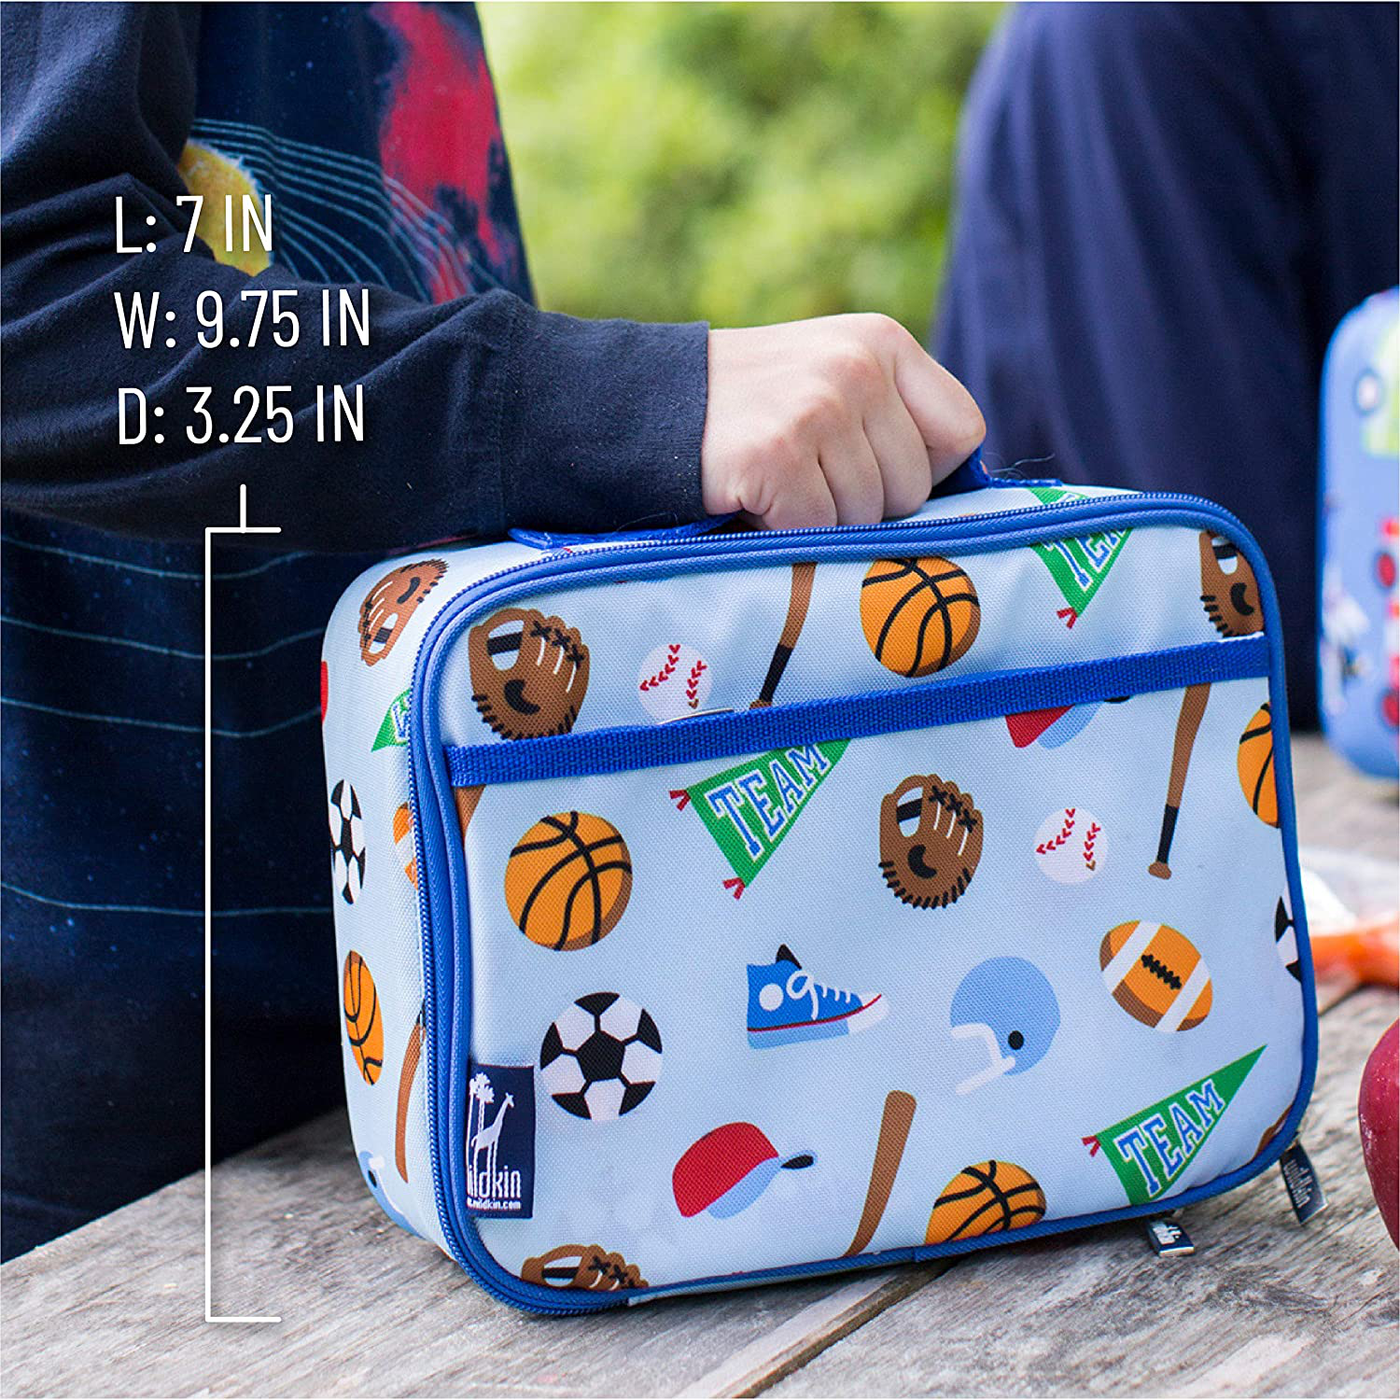 Wildkin Kids Insulated Lunch Box Bag for Boys and Girls, Perfect Size for Packing Hot or Cold Snacks for School and Travel, Mom's Choice Award Winner, BPA-free, Olive Kids (Sharks)